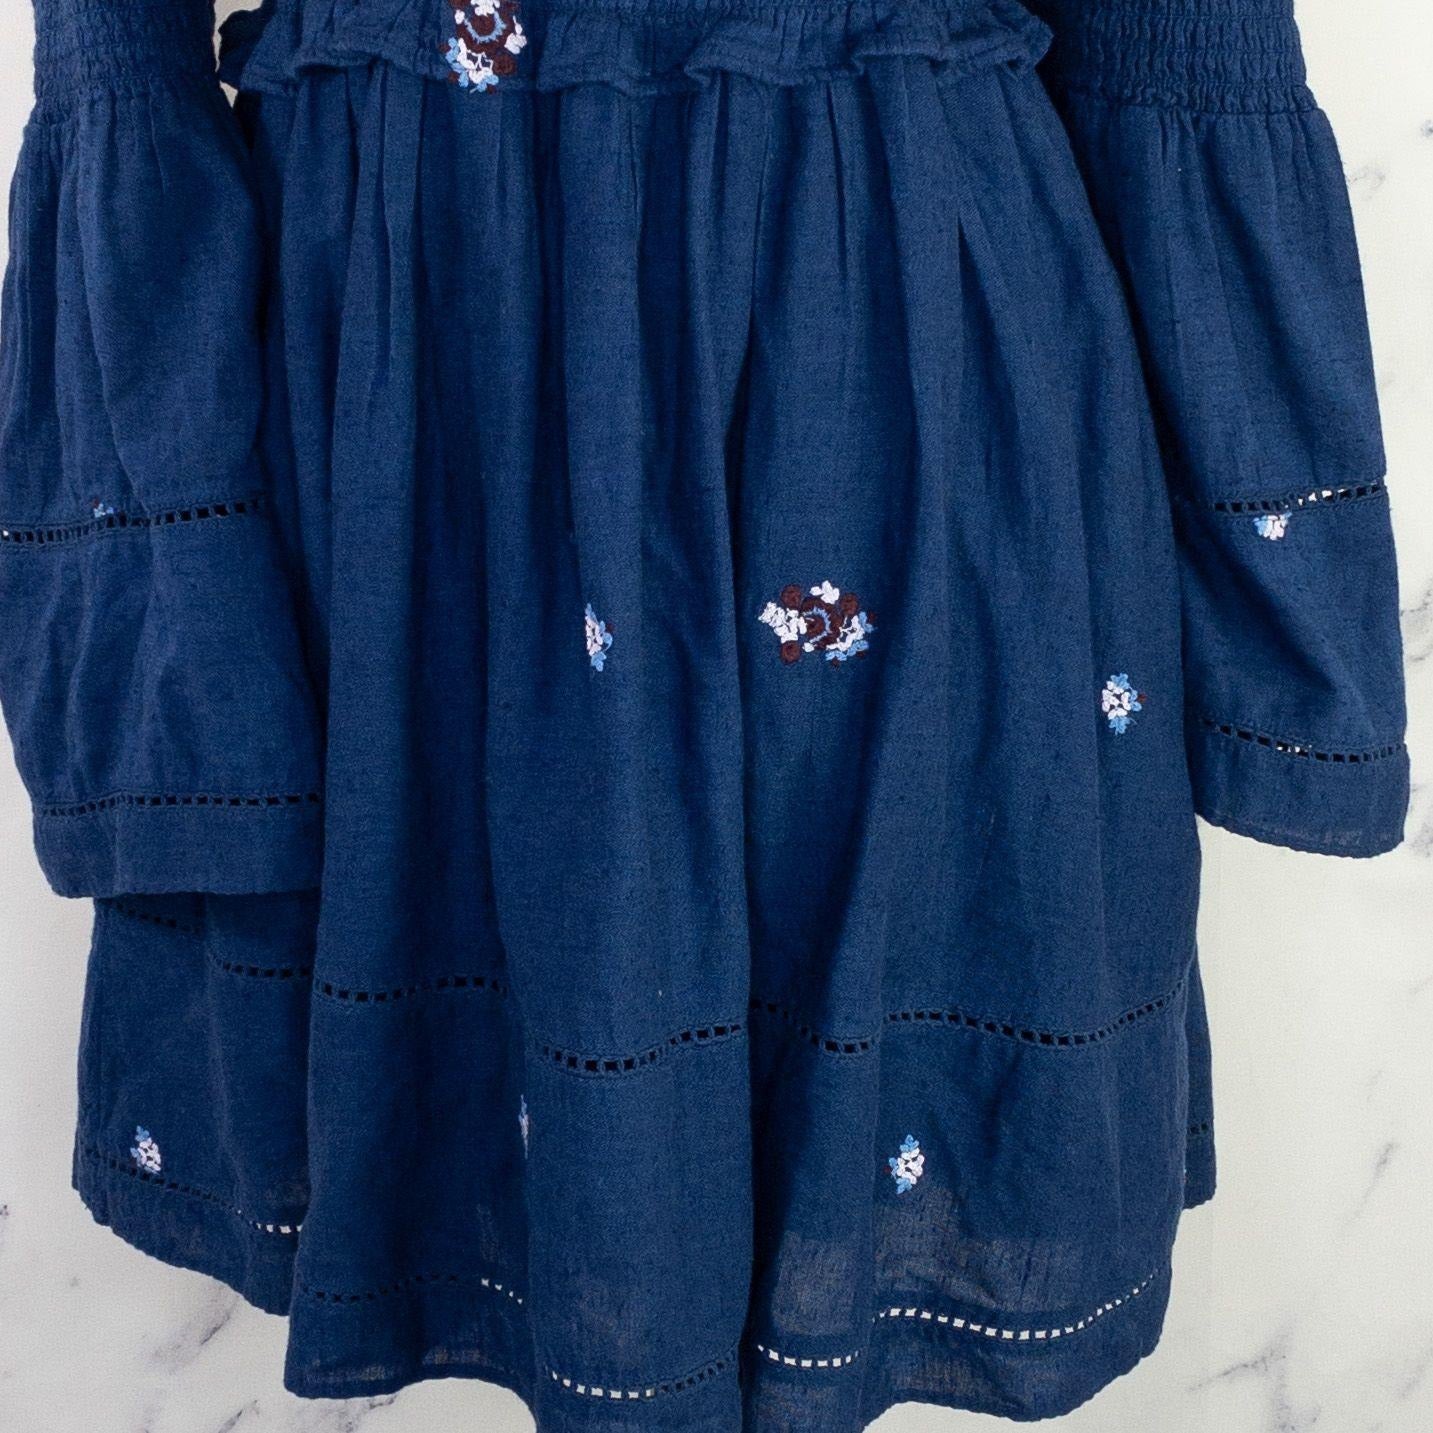 Free People | Counting Daisies Off-The-Shoulder Dress | Blue | Size M